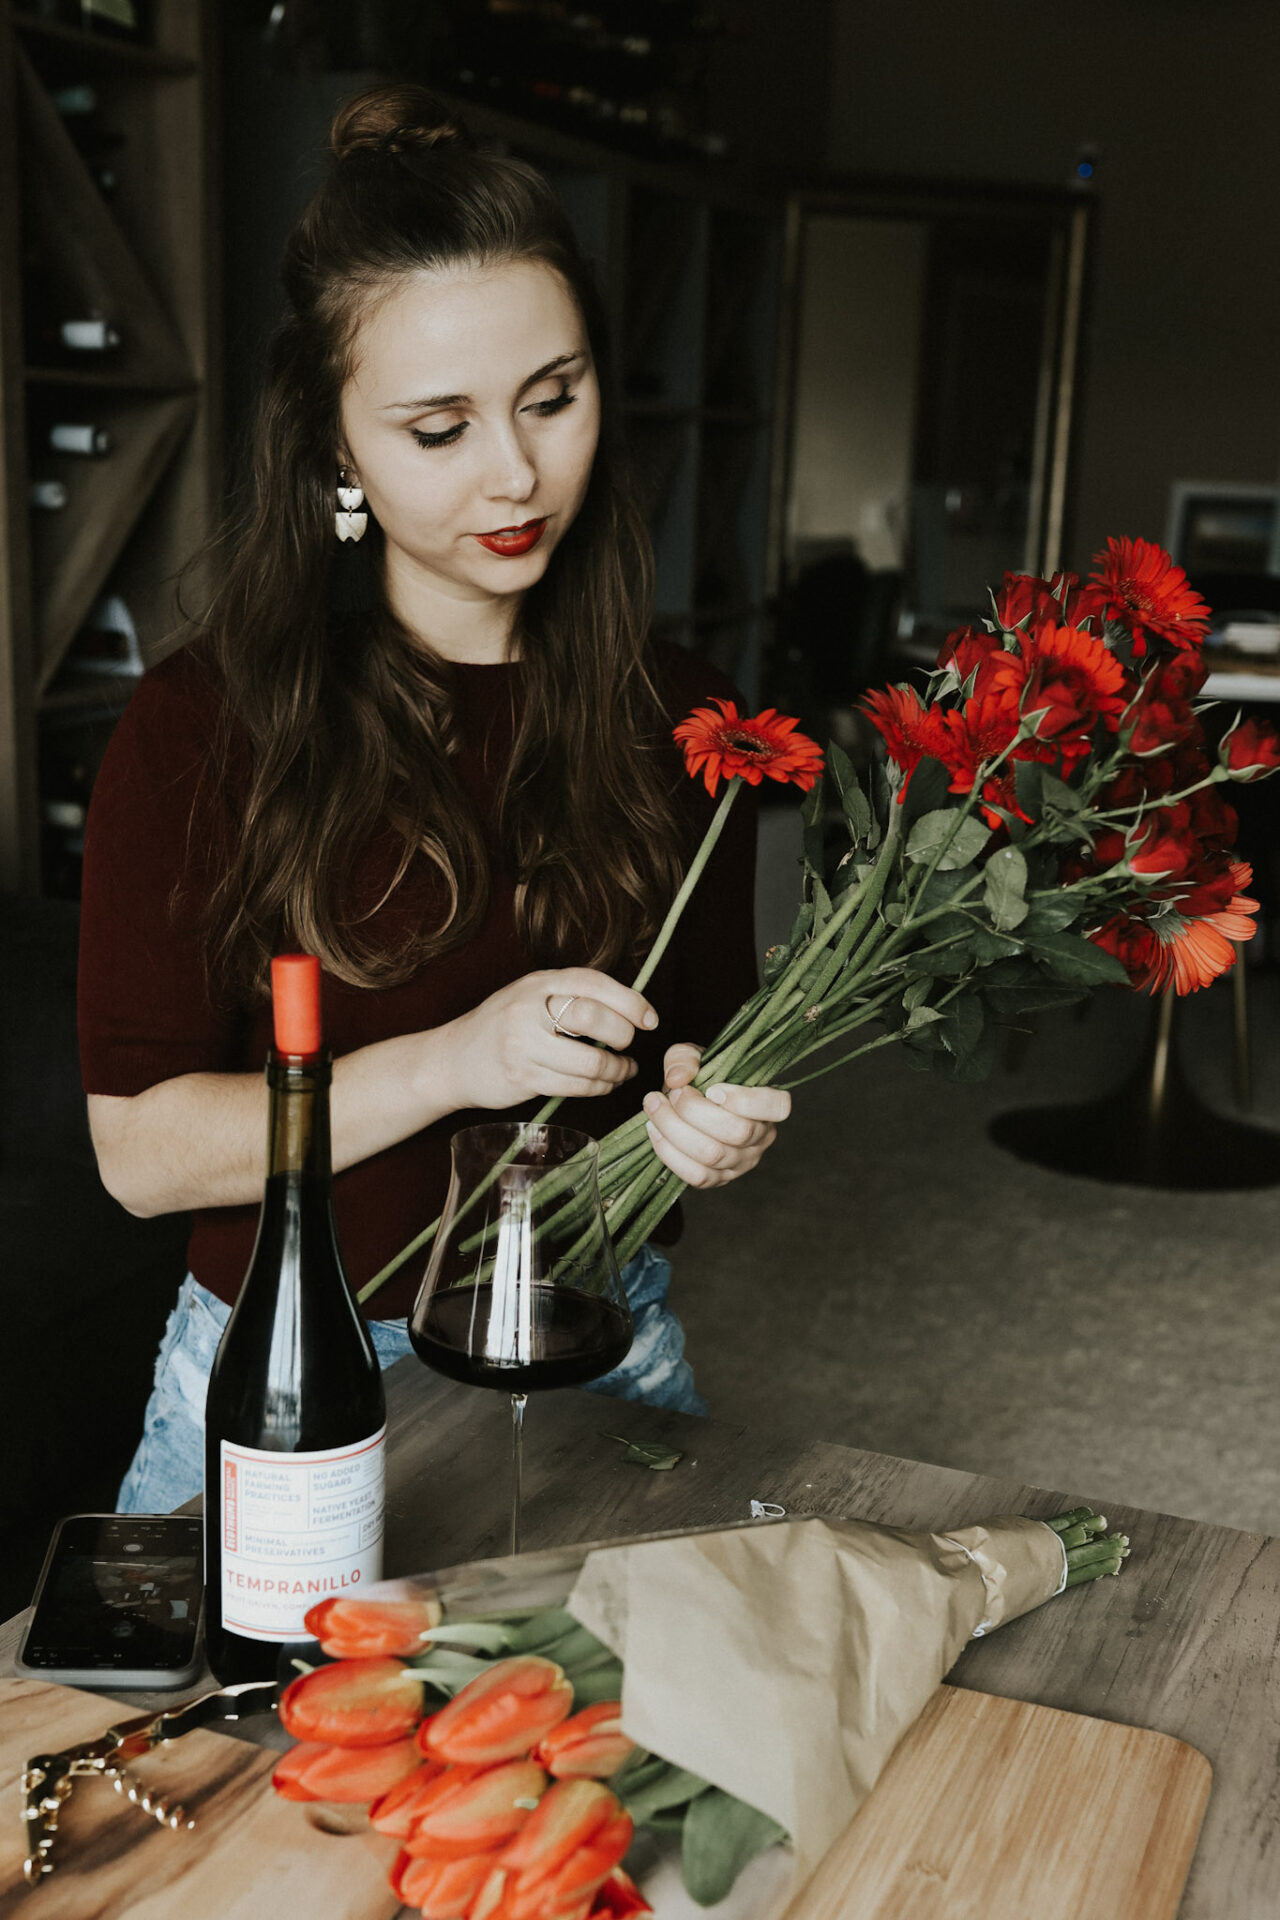 Paige with red flowers and light red wine in a glass next to her